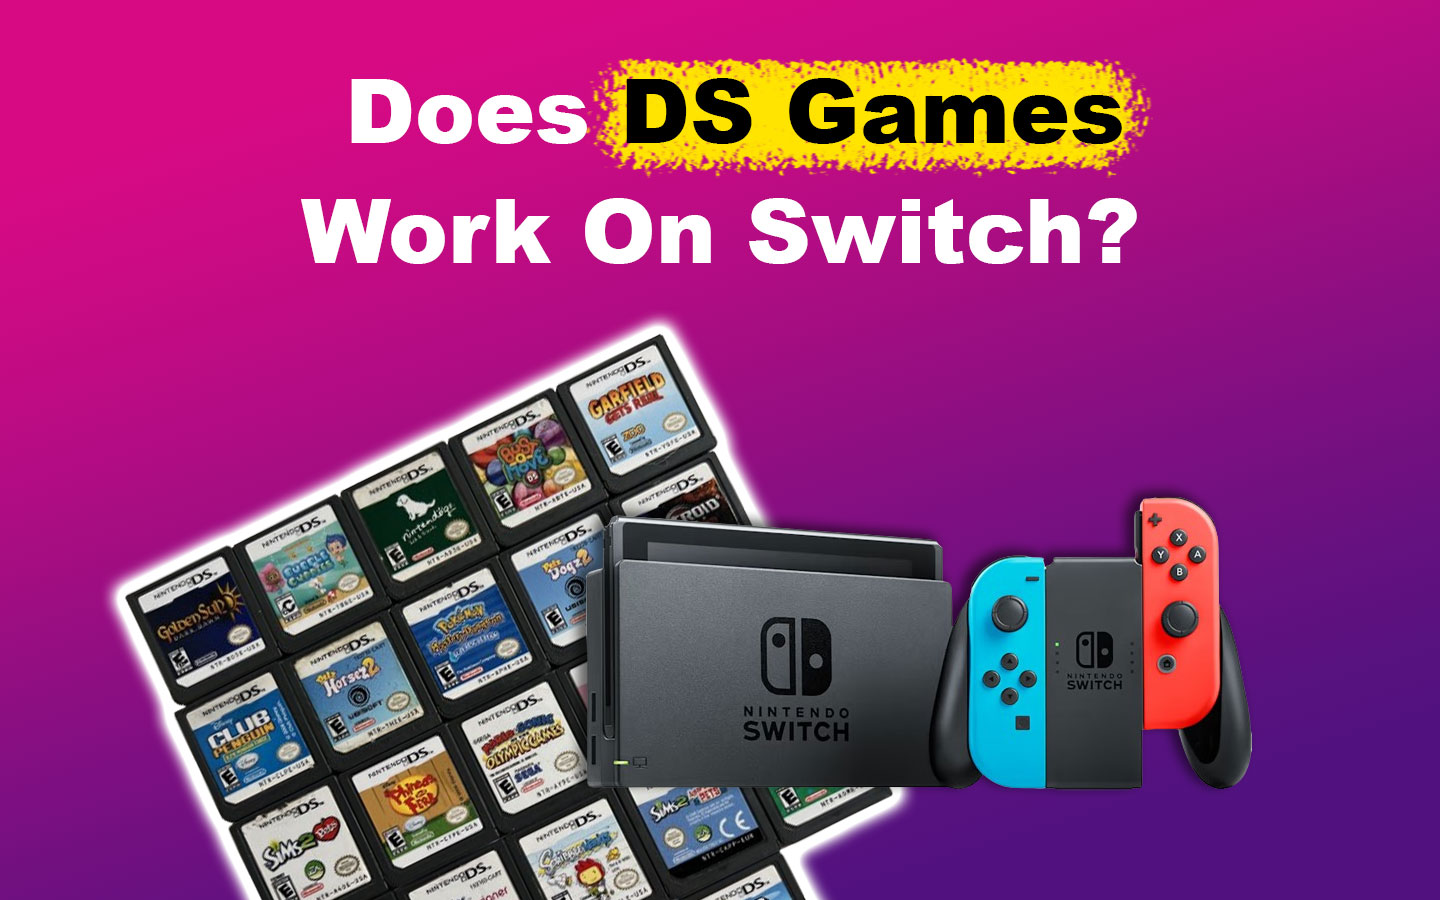 Do DS Games Work On Switch